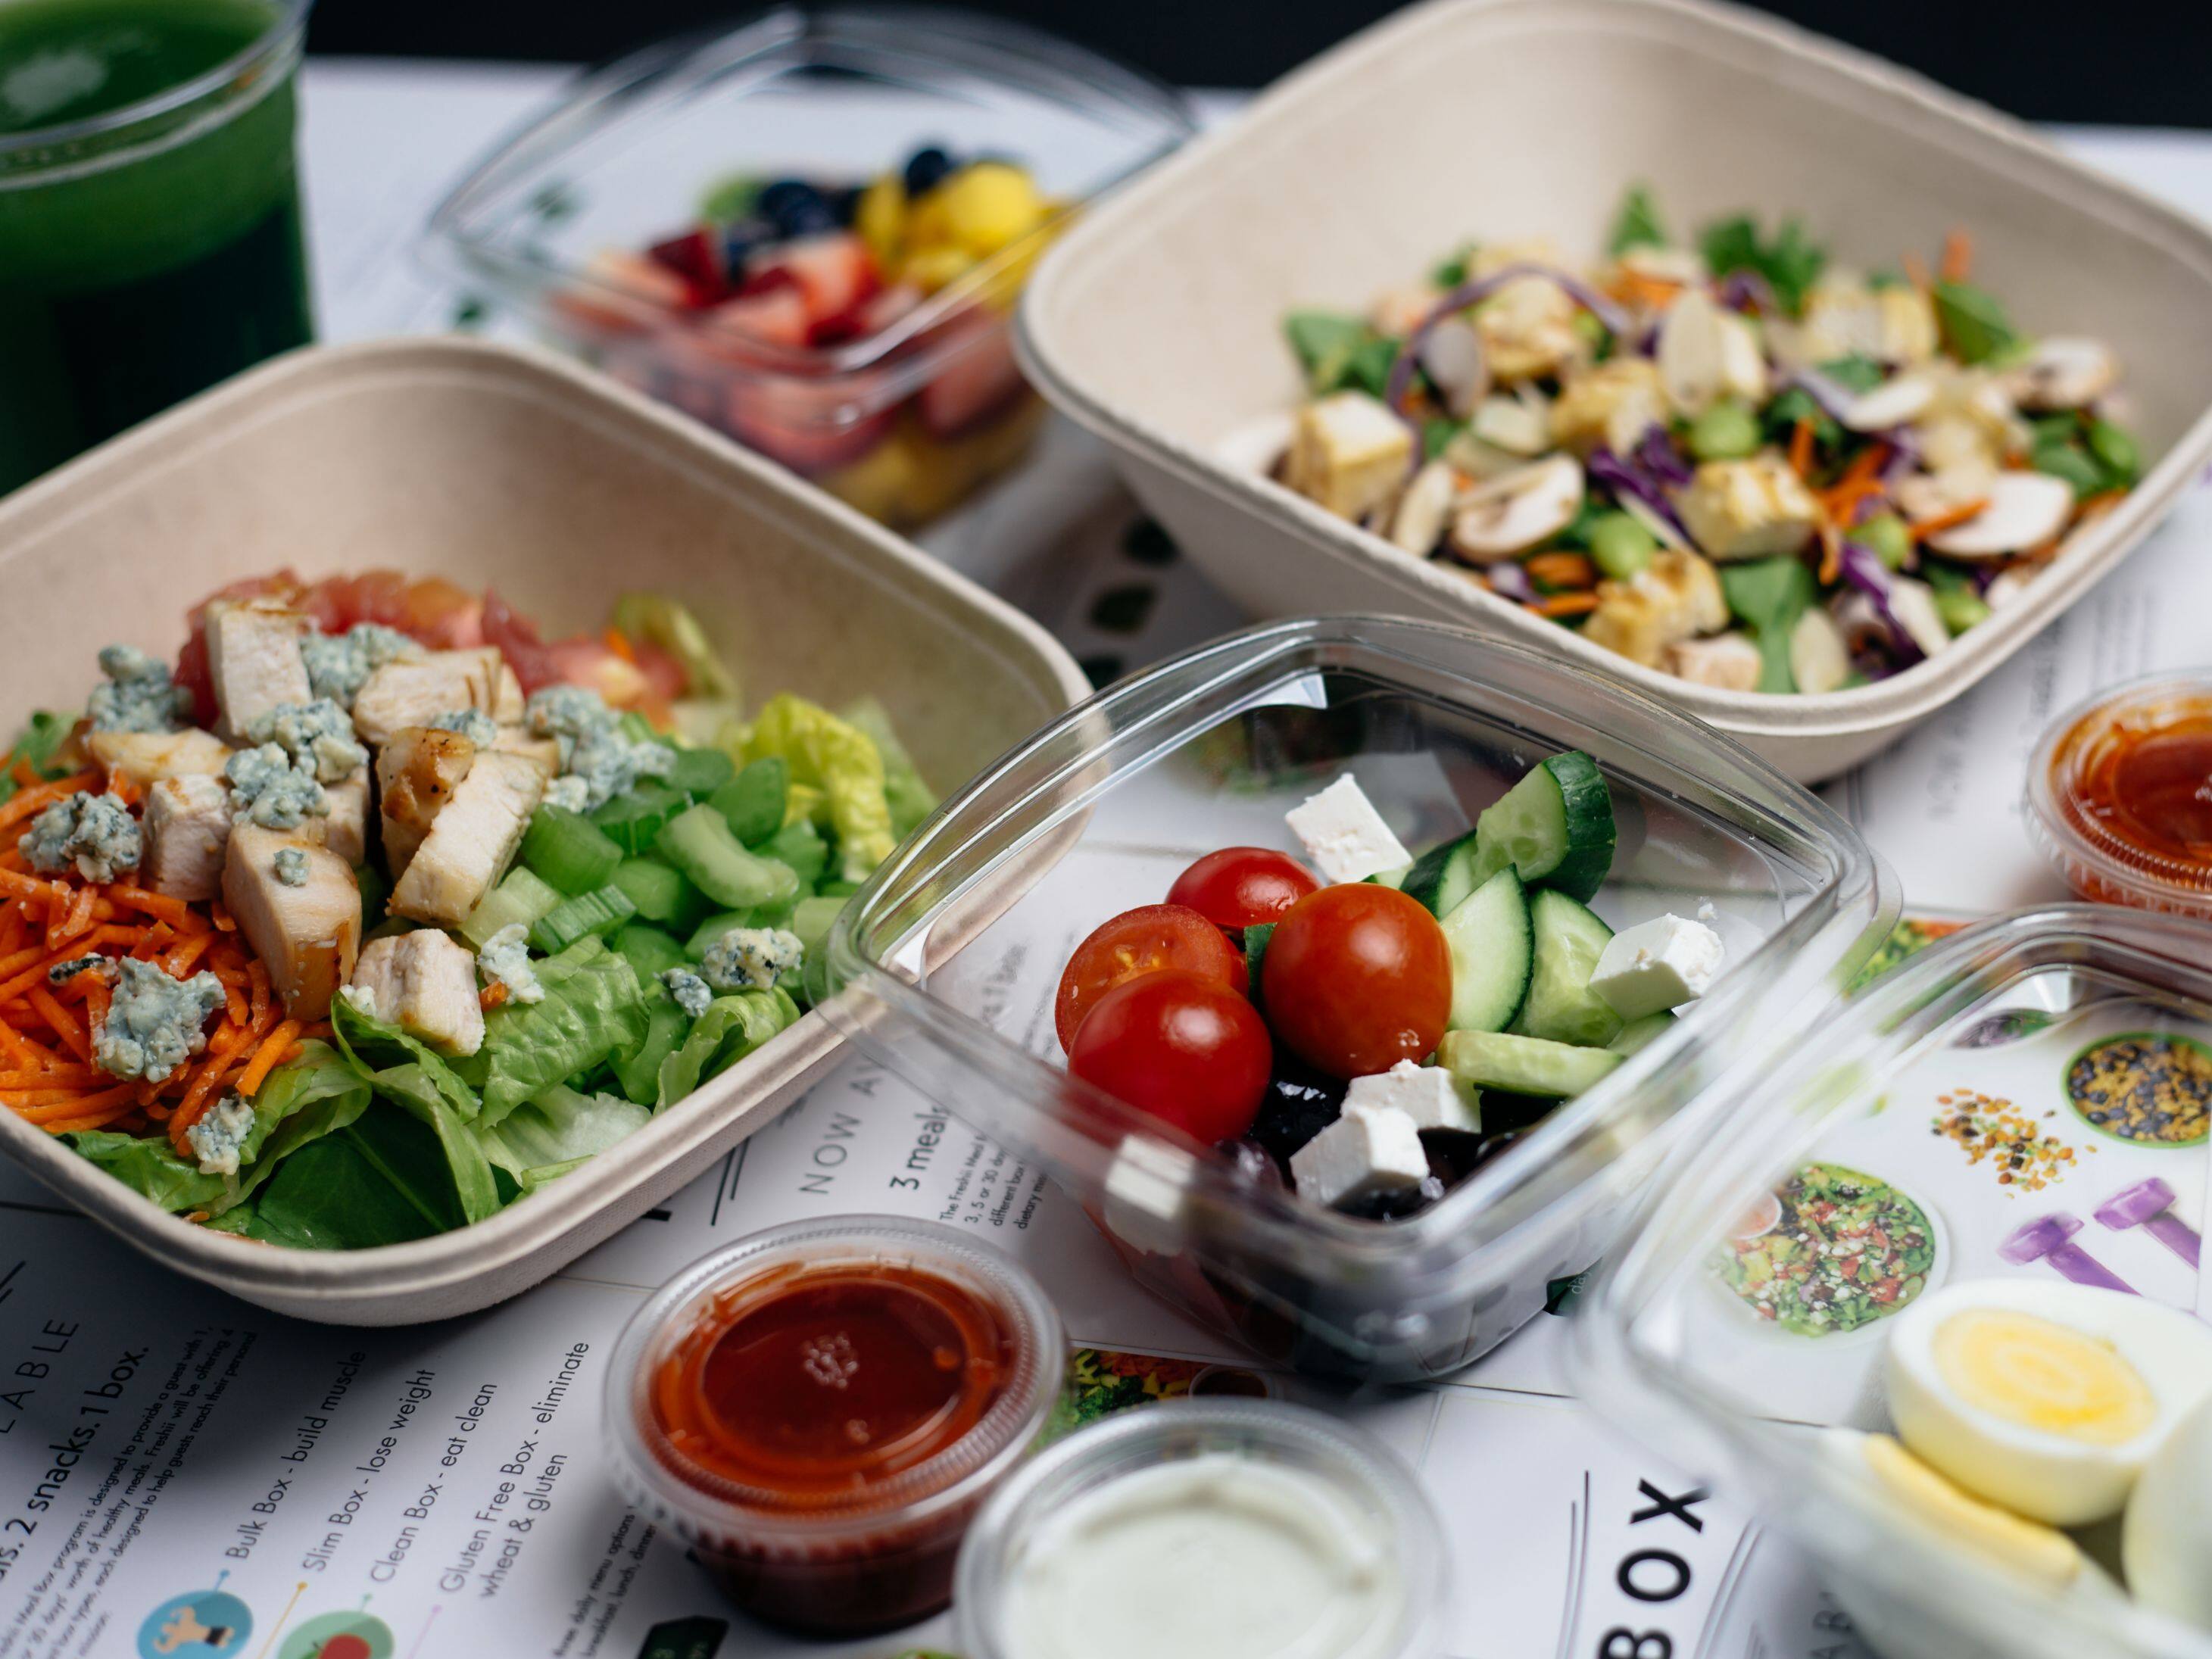 Freshii is one of the best healthy eating spots in Dubai